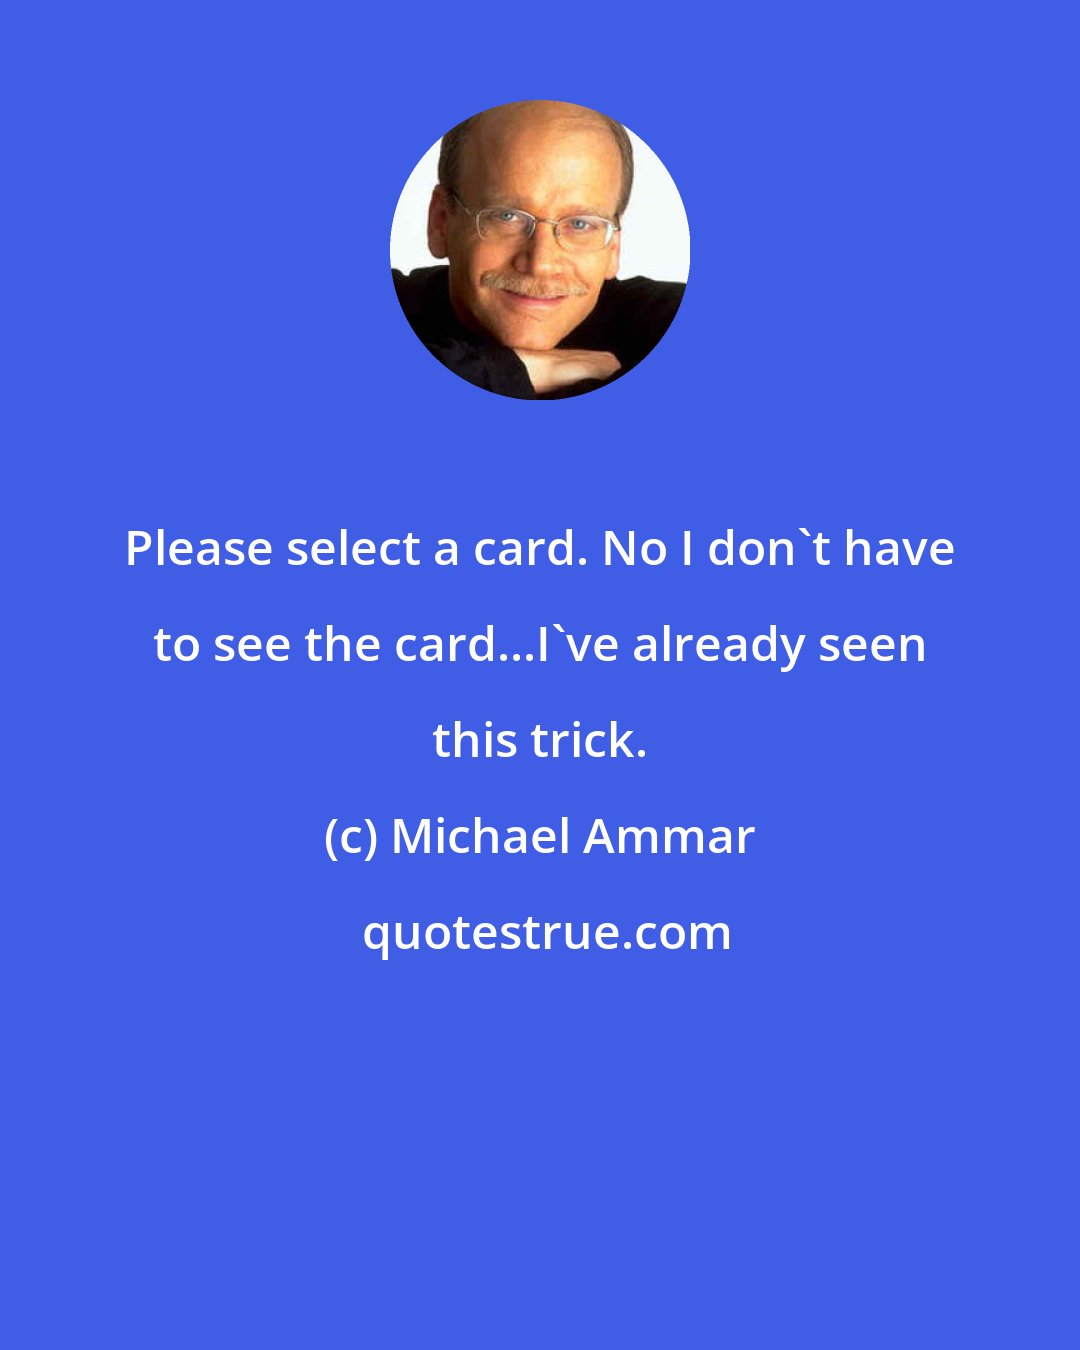 Michael Ammar: Please select a card. No I don't have to see the card...I've already seen this trick.